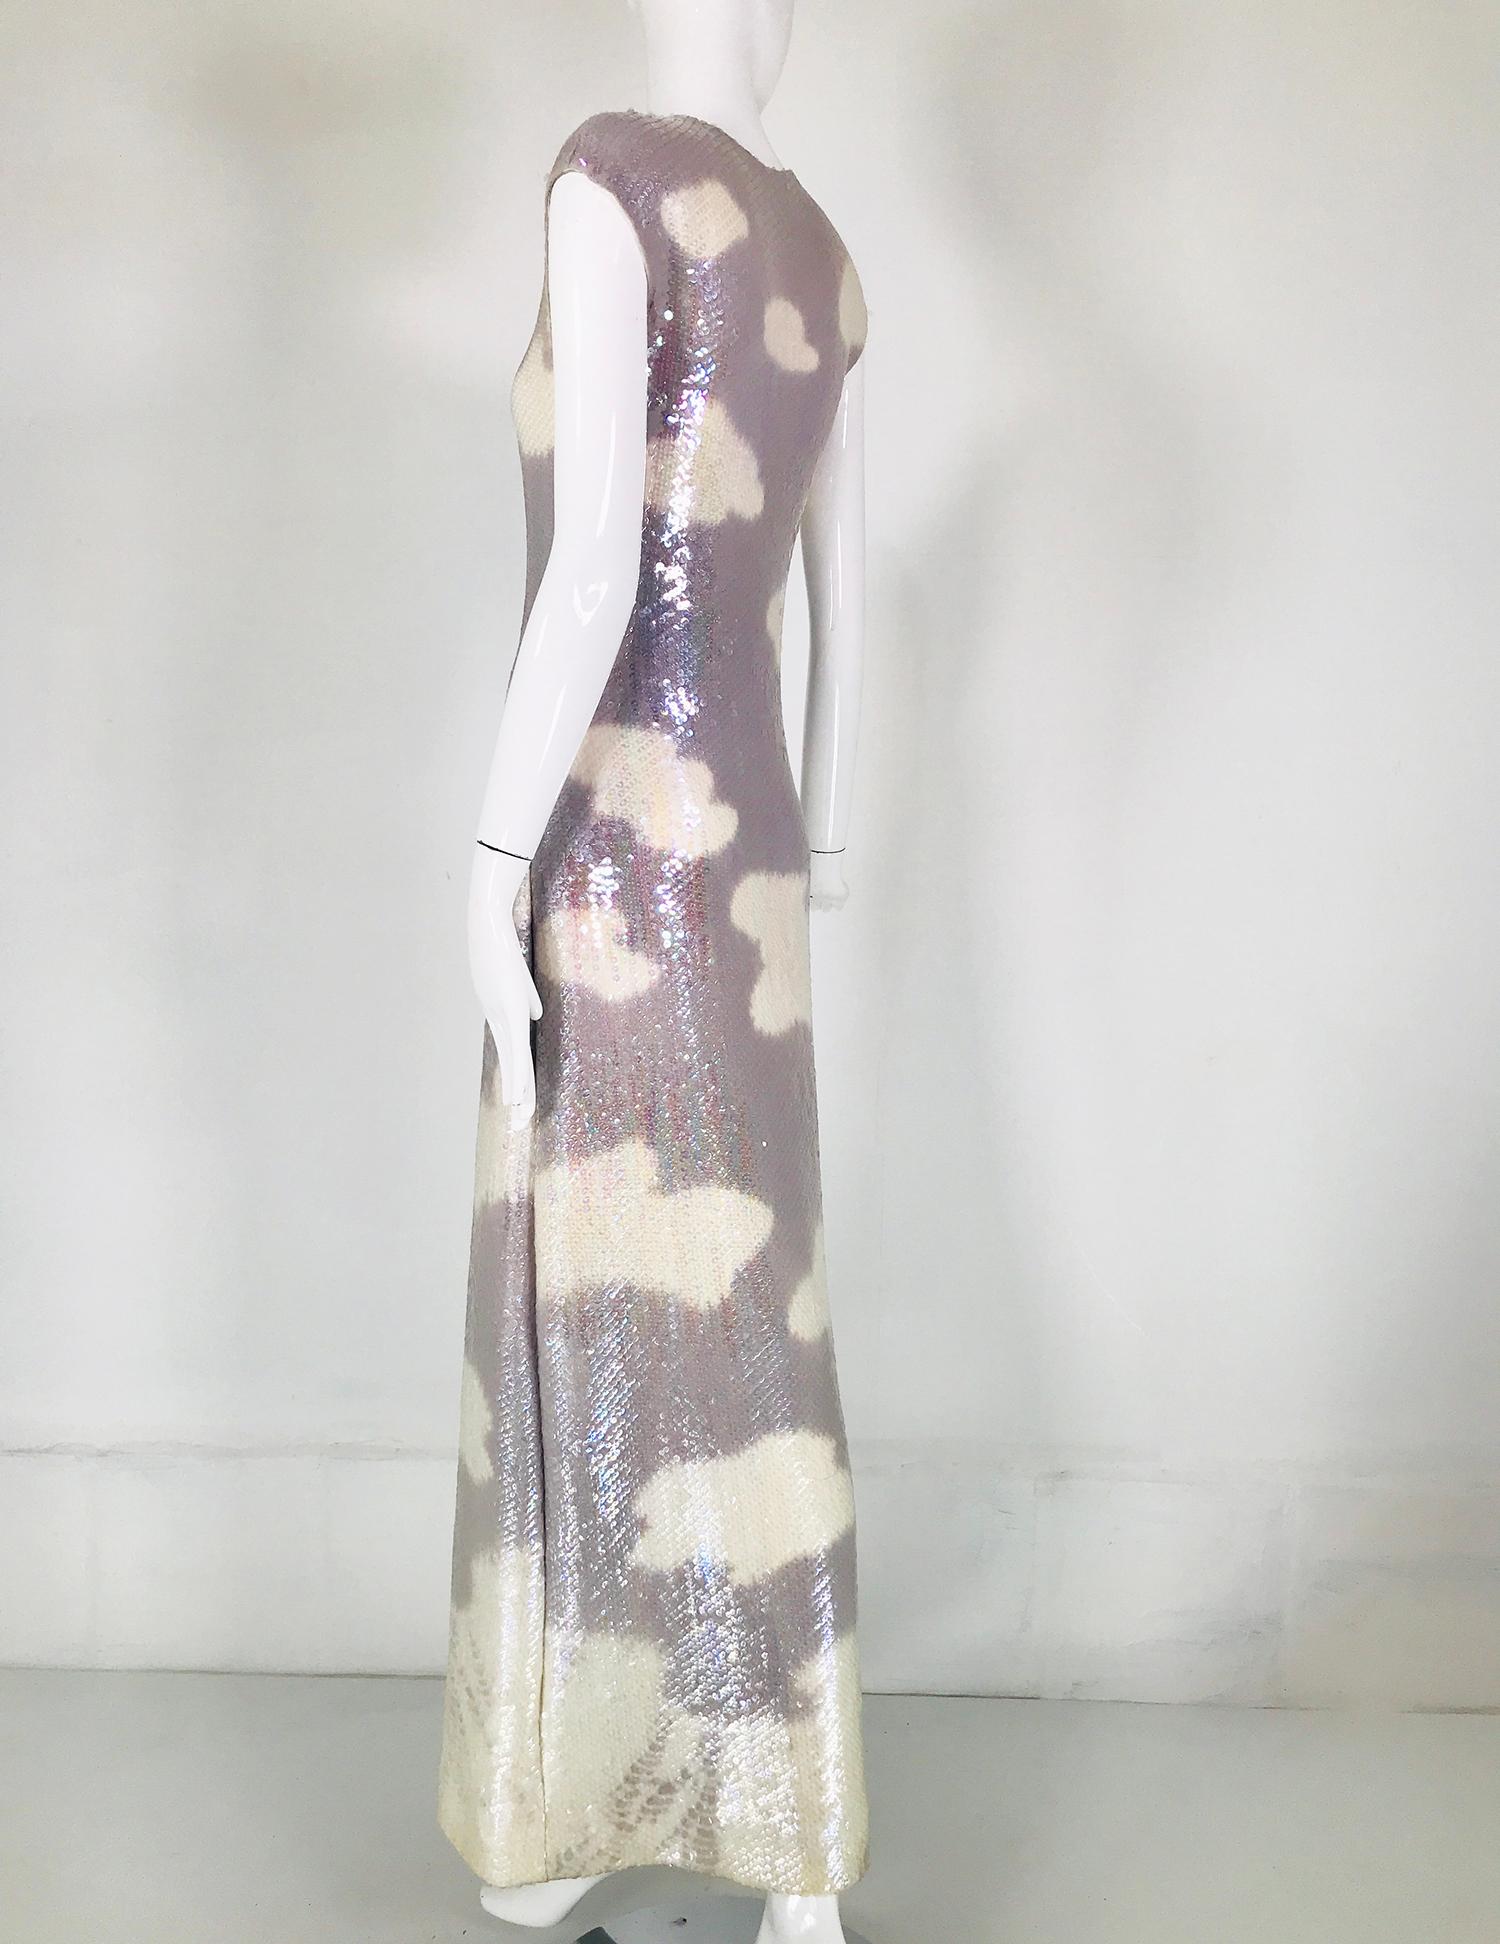 Halston Iconic Clouds Dress in Stormy Grey & Cream Iridescent Sequins Mid 1970s 5